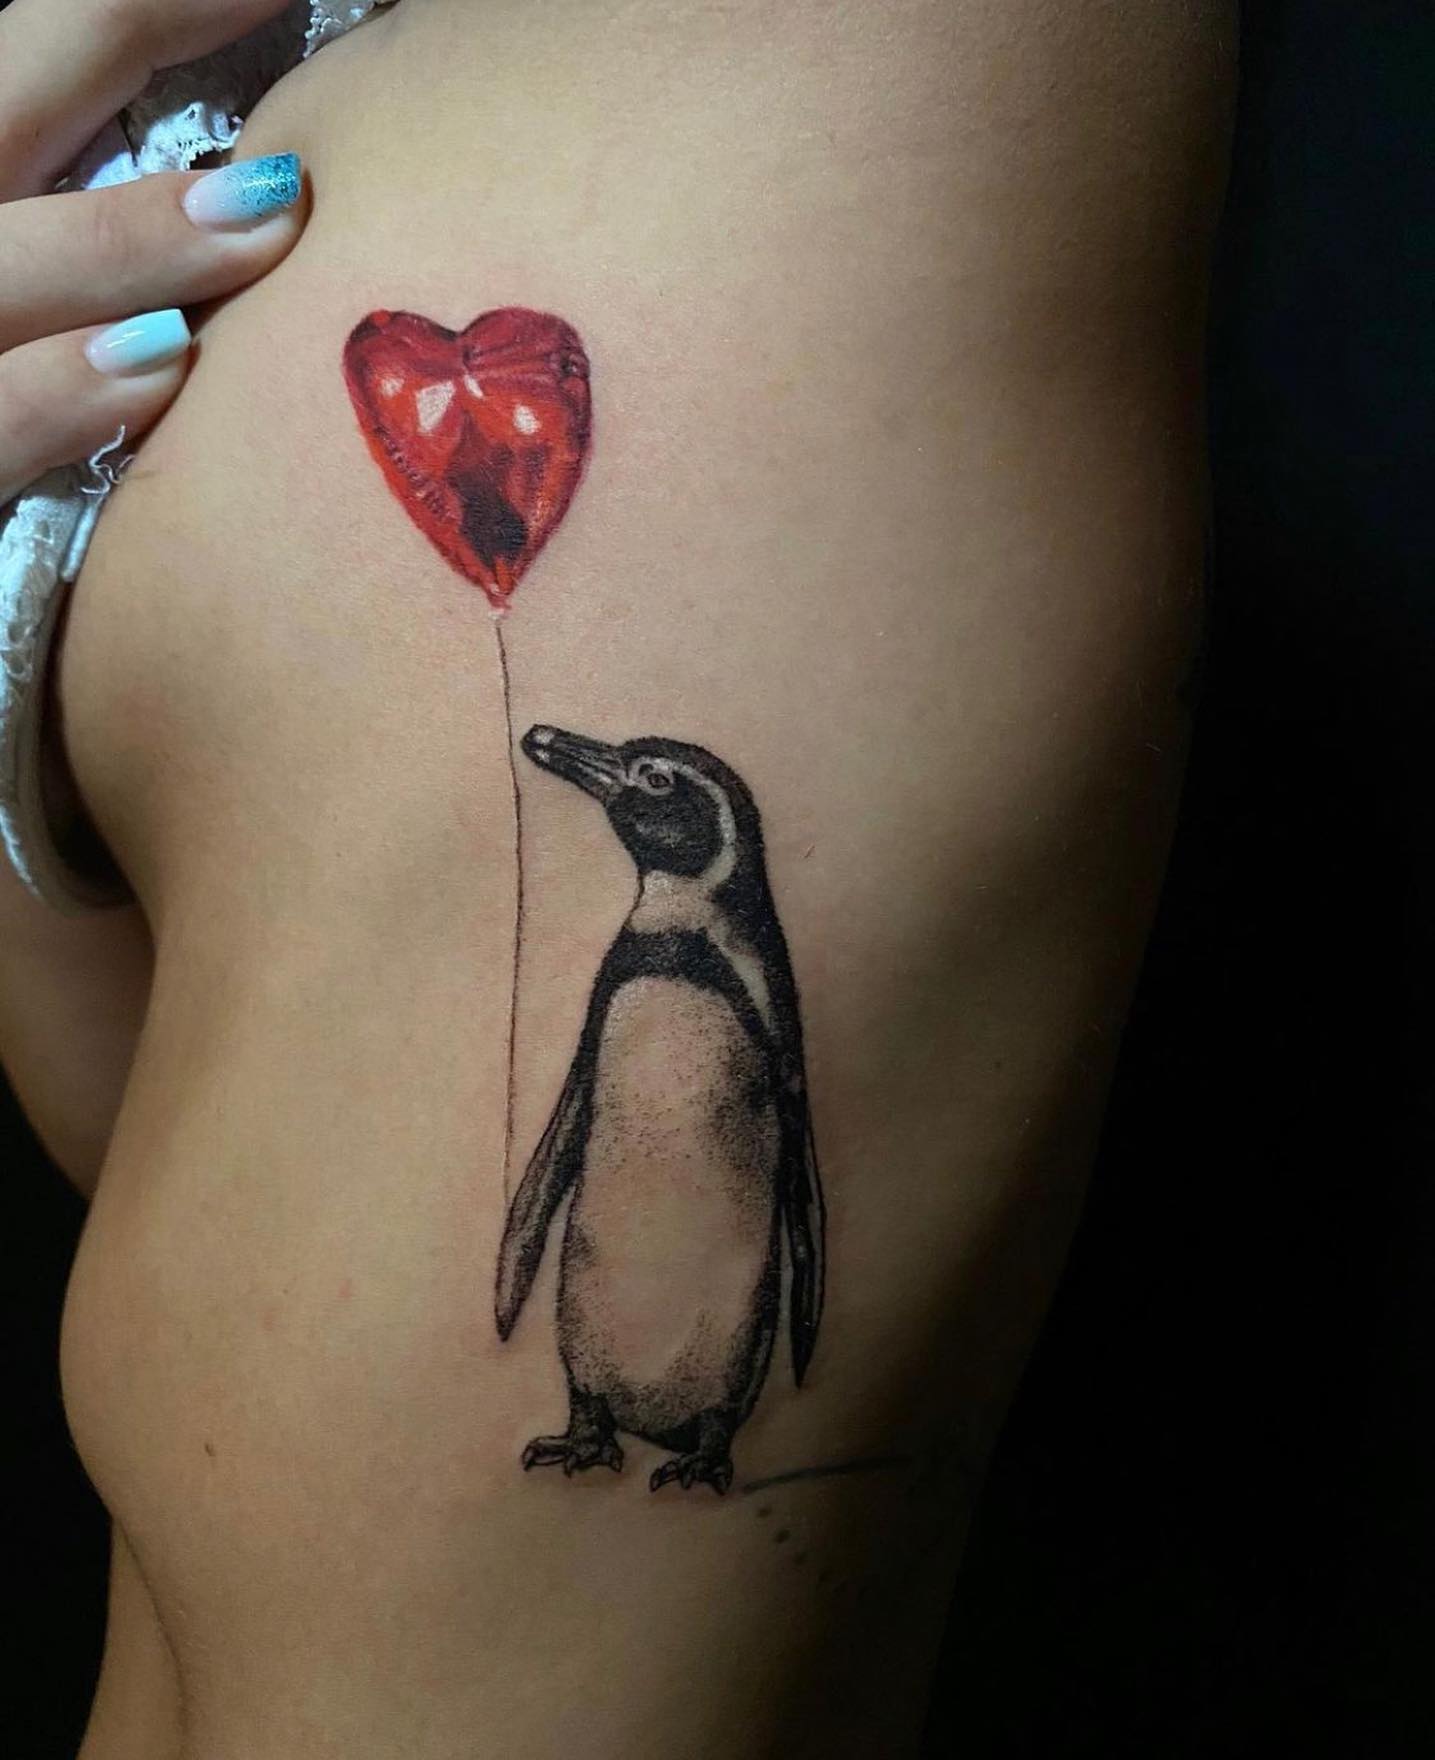 A lonely penguin holding a heart shaped flying balloon looks like a great tattoo. If you feel like this penguin, don't wait too long to get it.